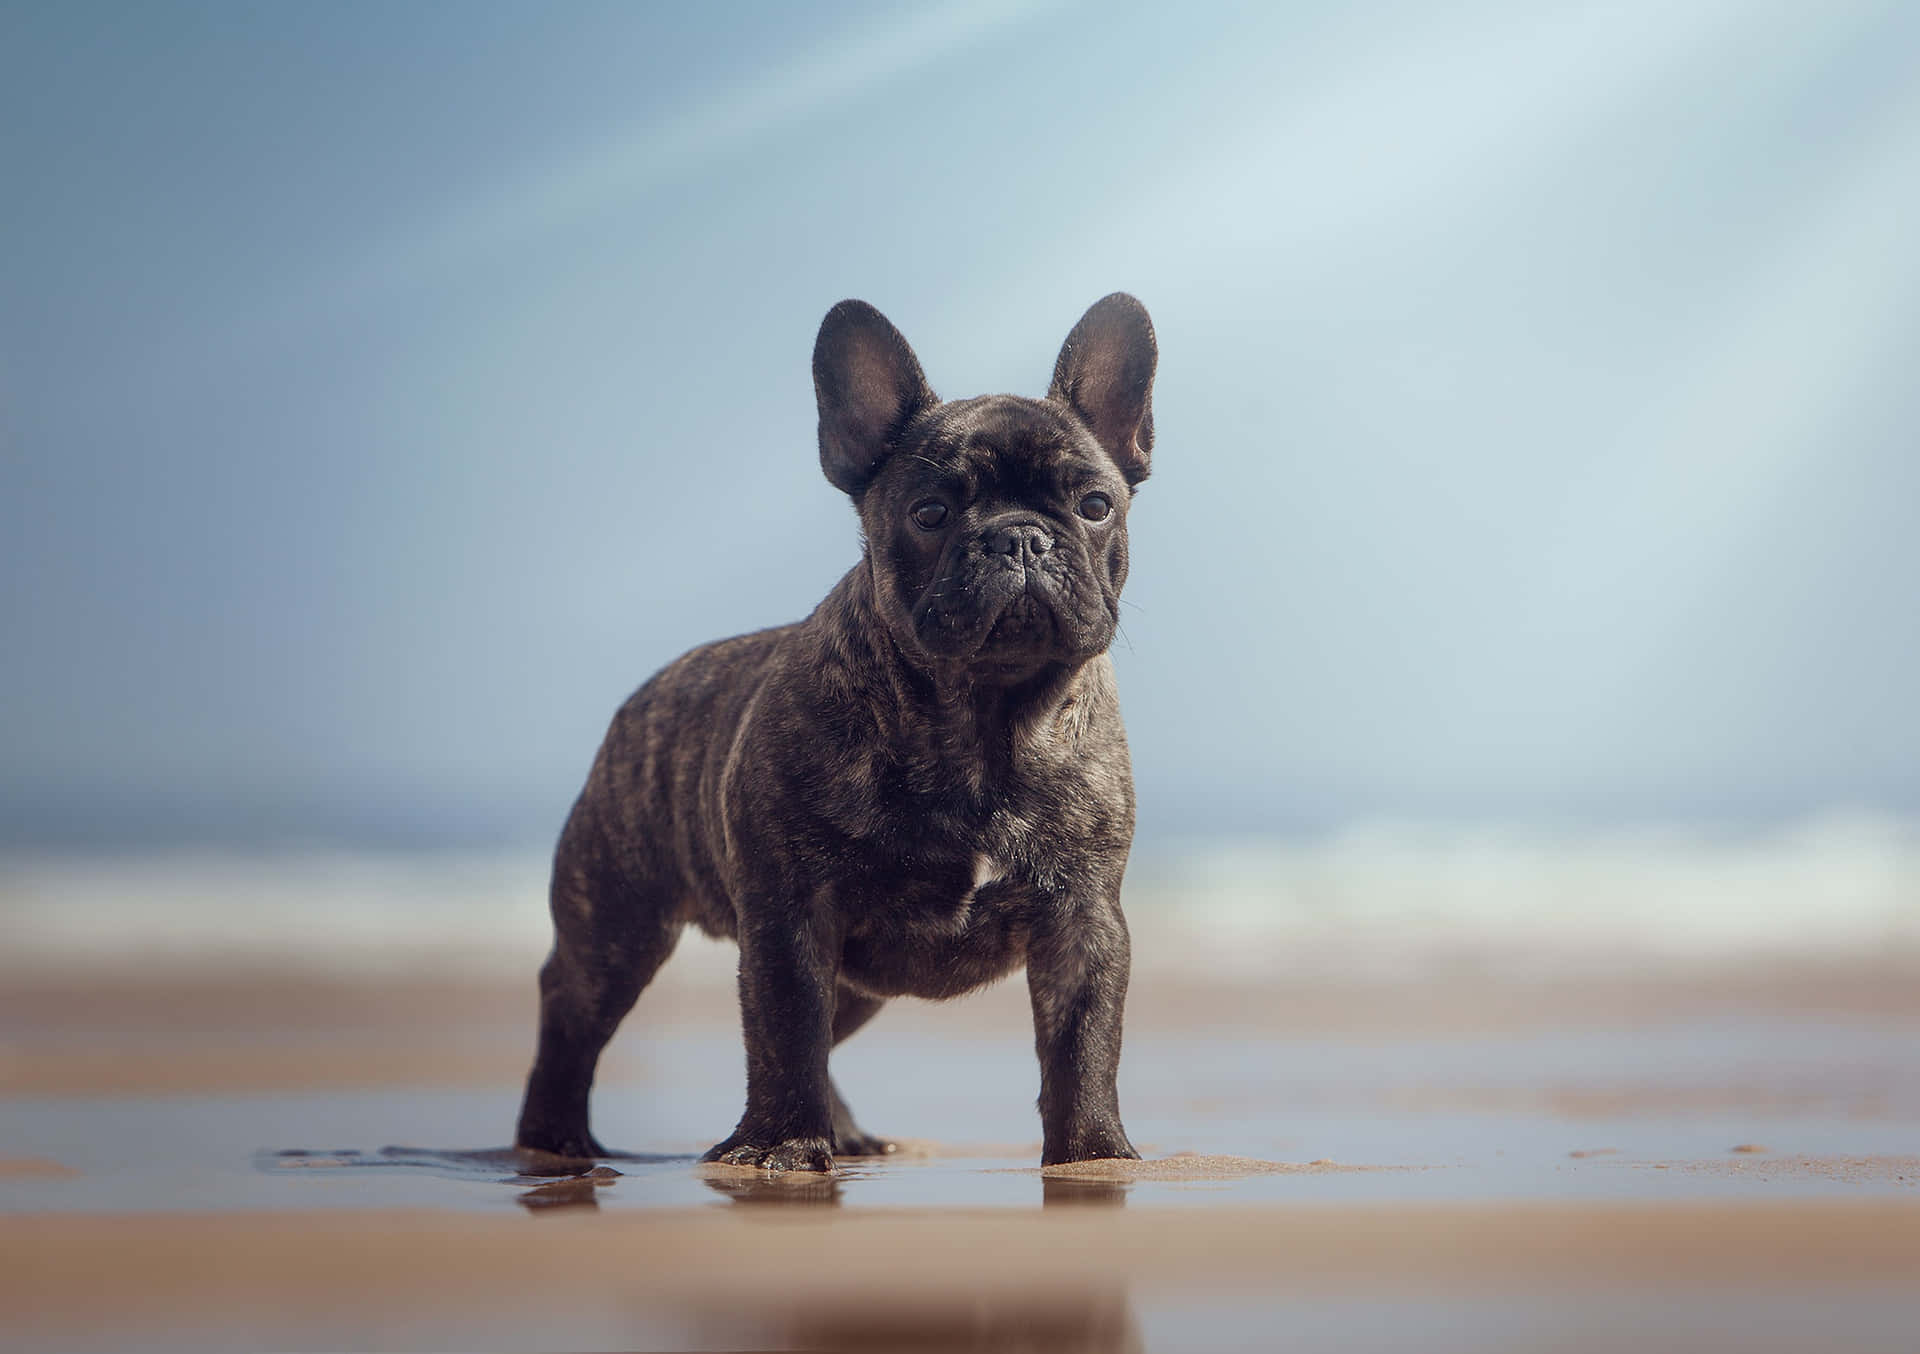 A French Bulldog looking very content